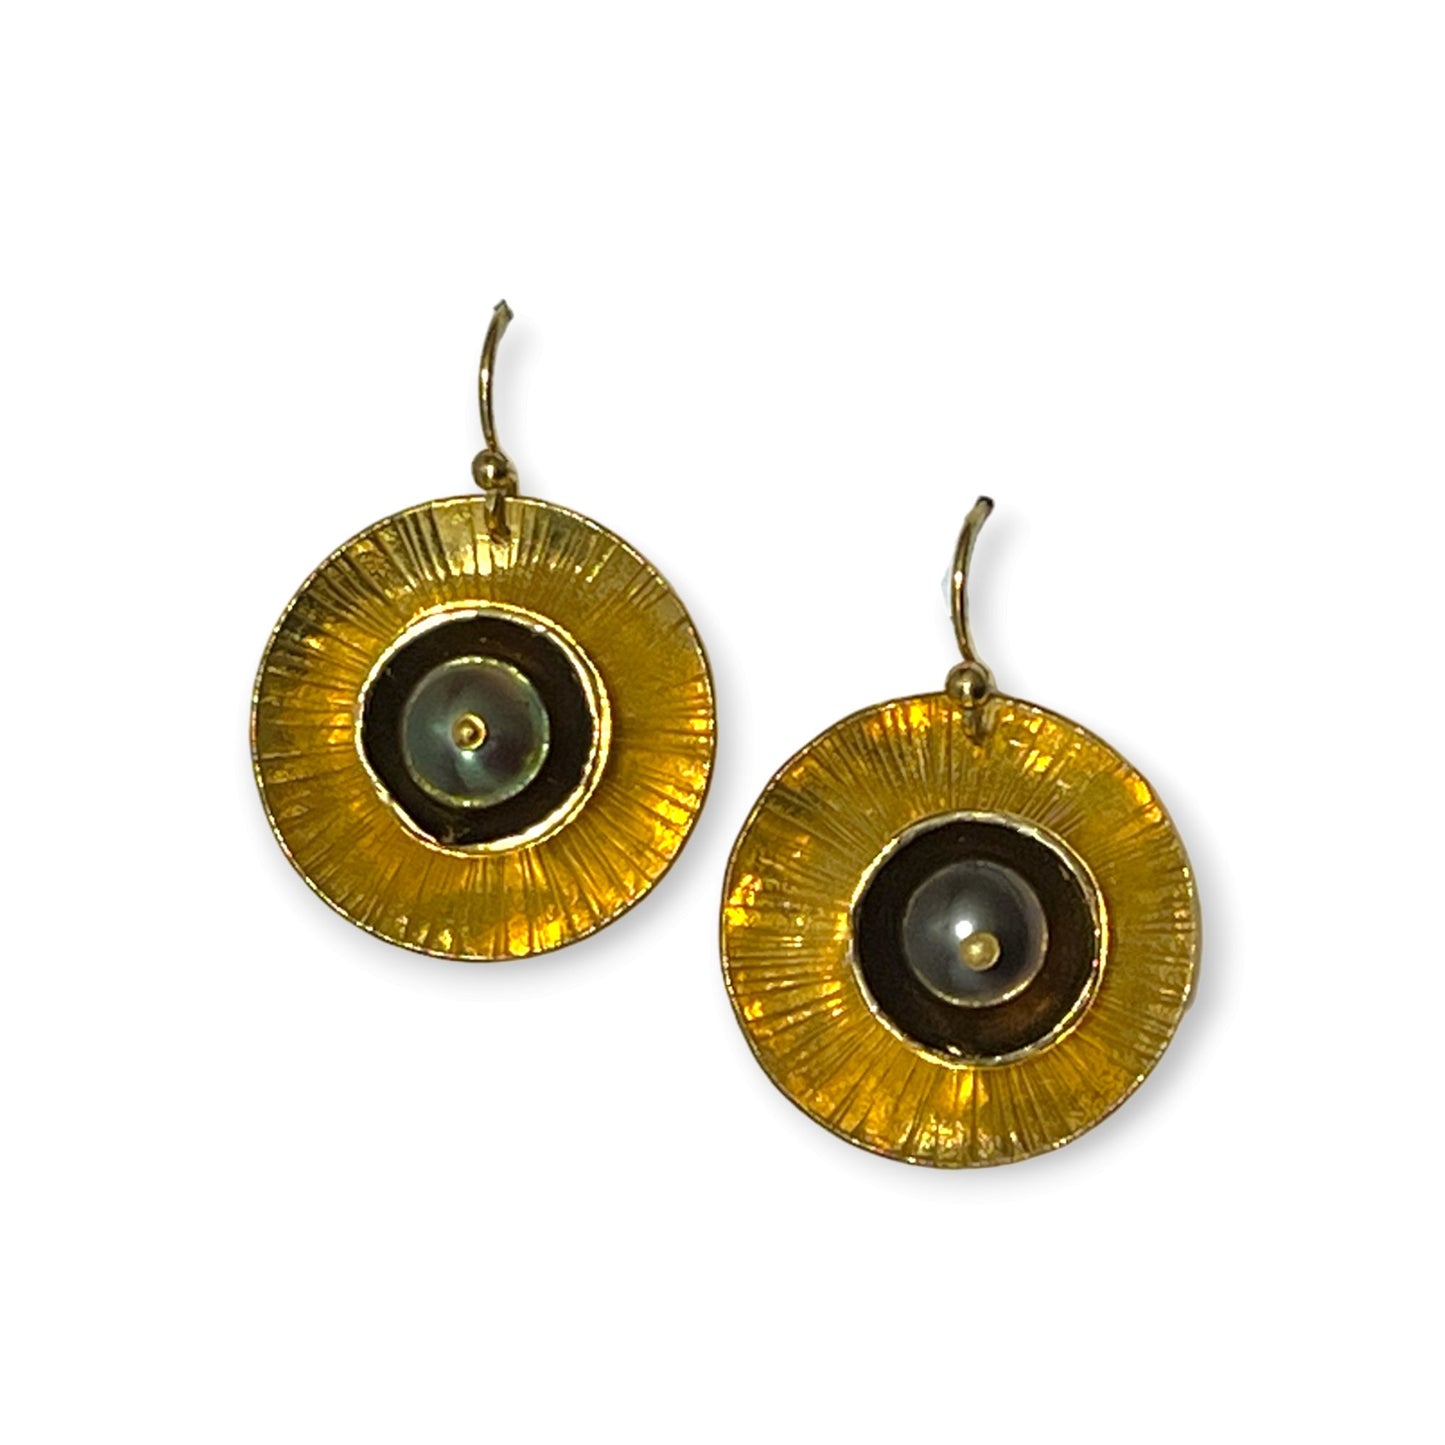 Lilly pad inspired earrings with white or black pearls - Sundara Joon